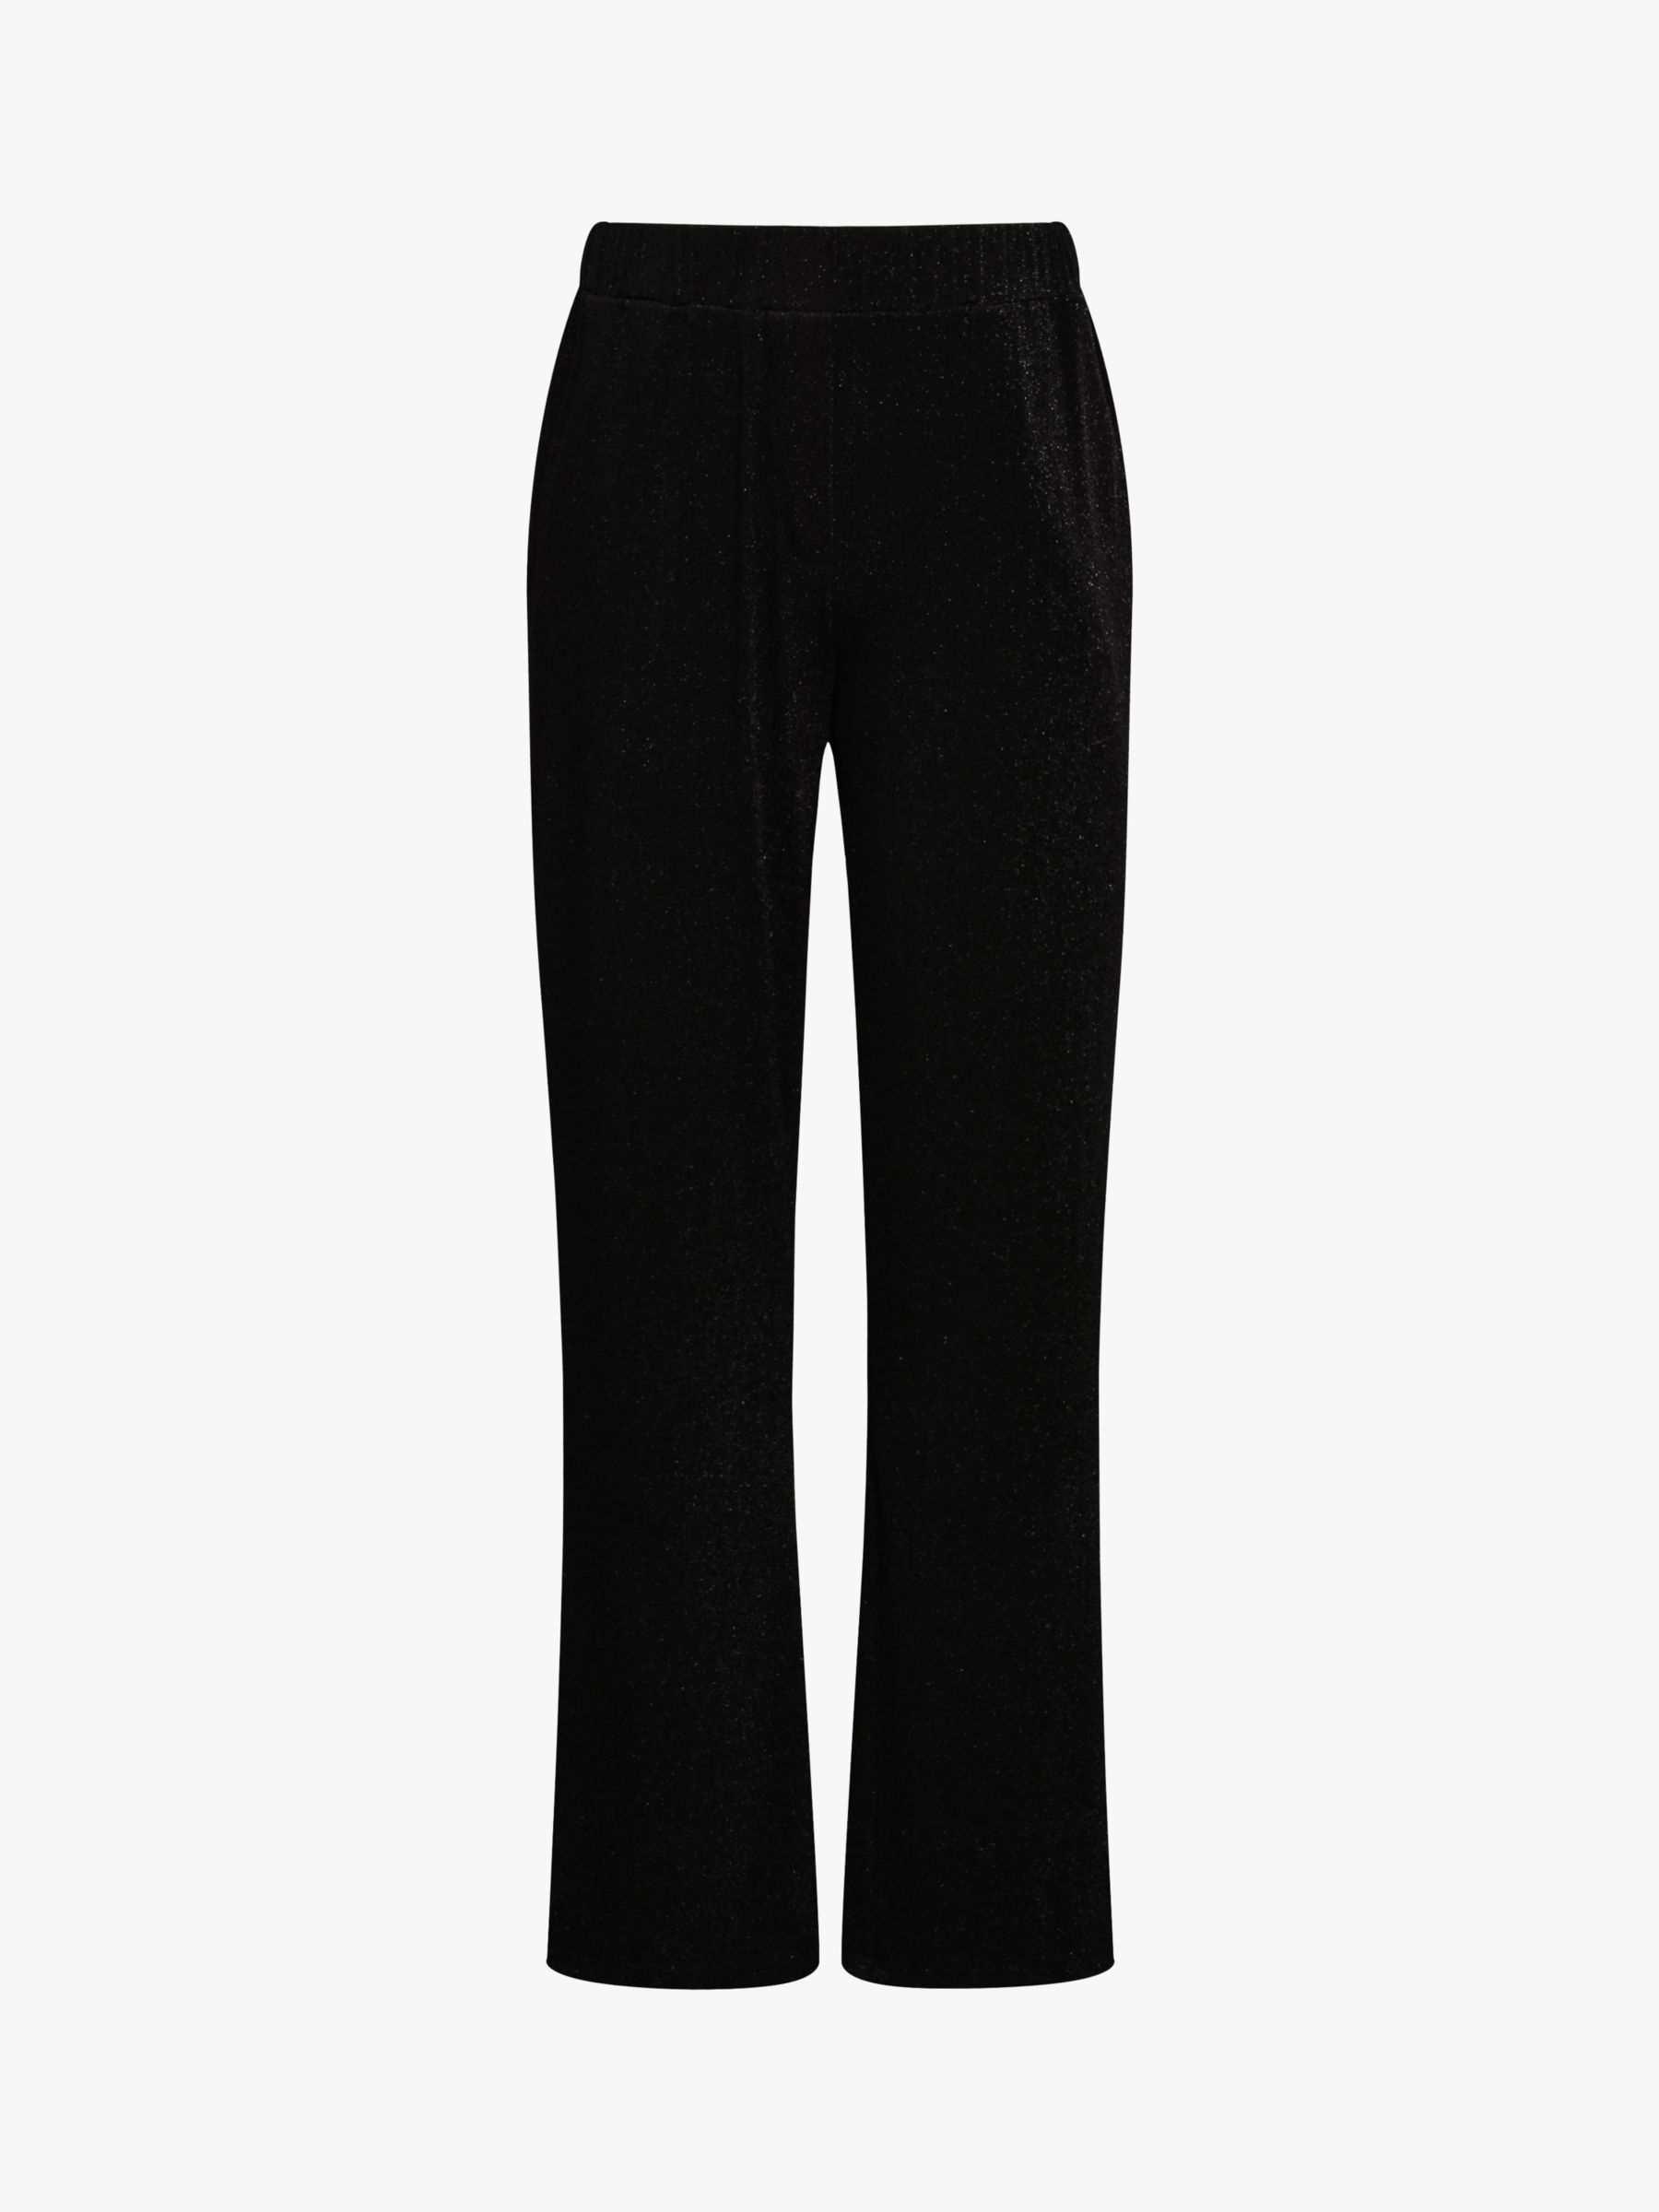 A-VIEW Eva Loose Trousers, Black, 8